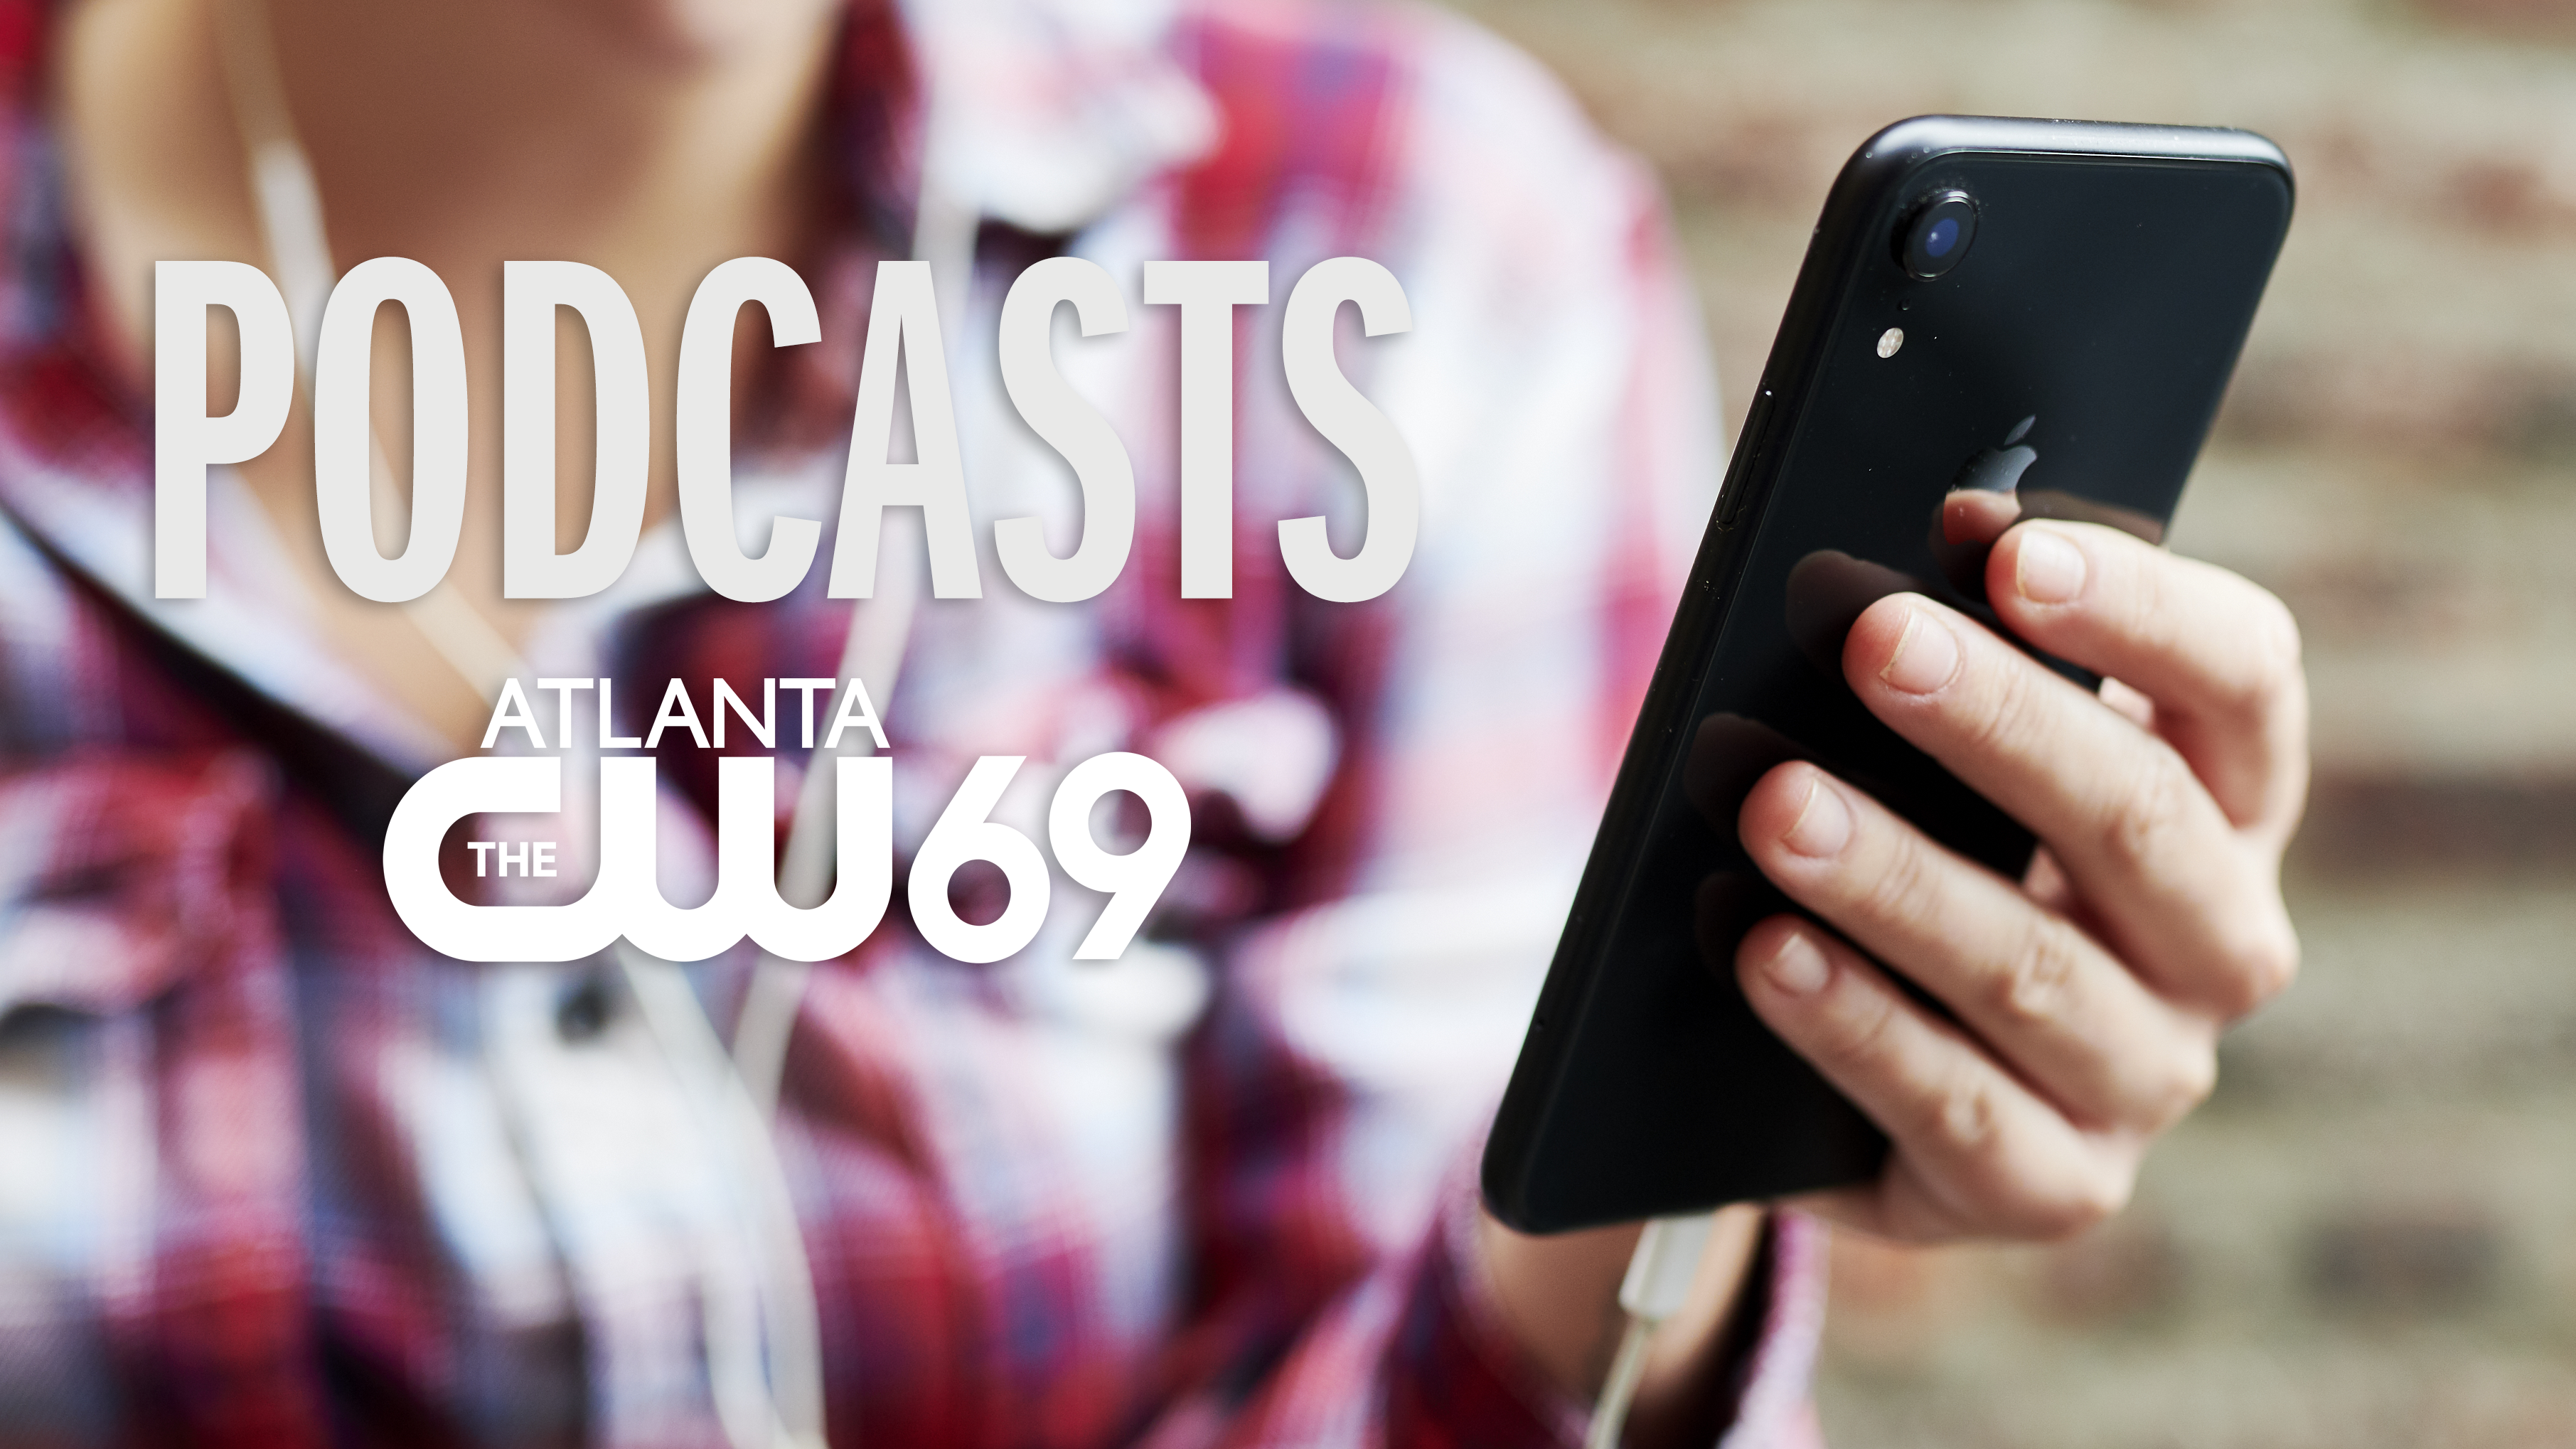 Listen to CW69 shows podcasts anytime – CW69 Atlanta